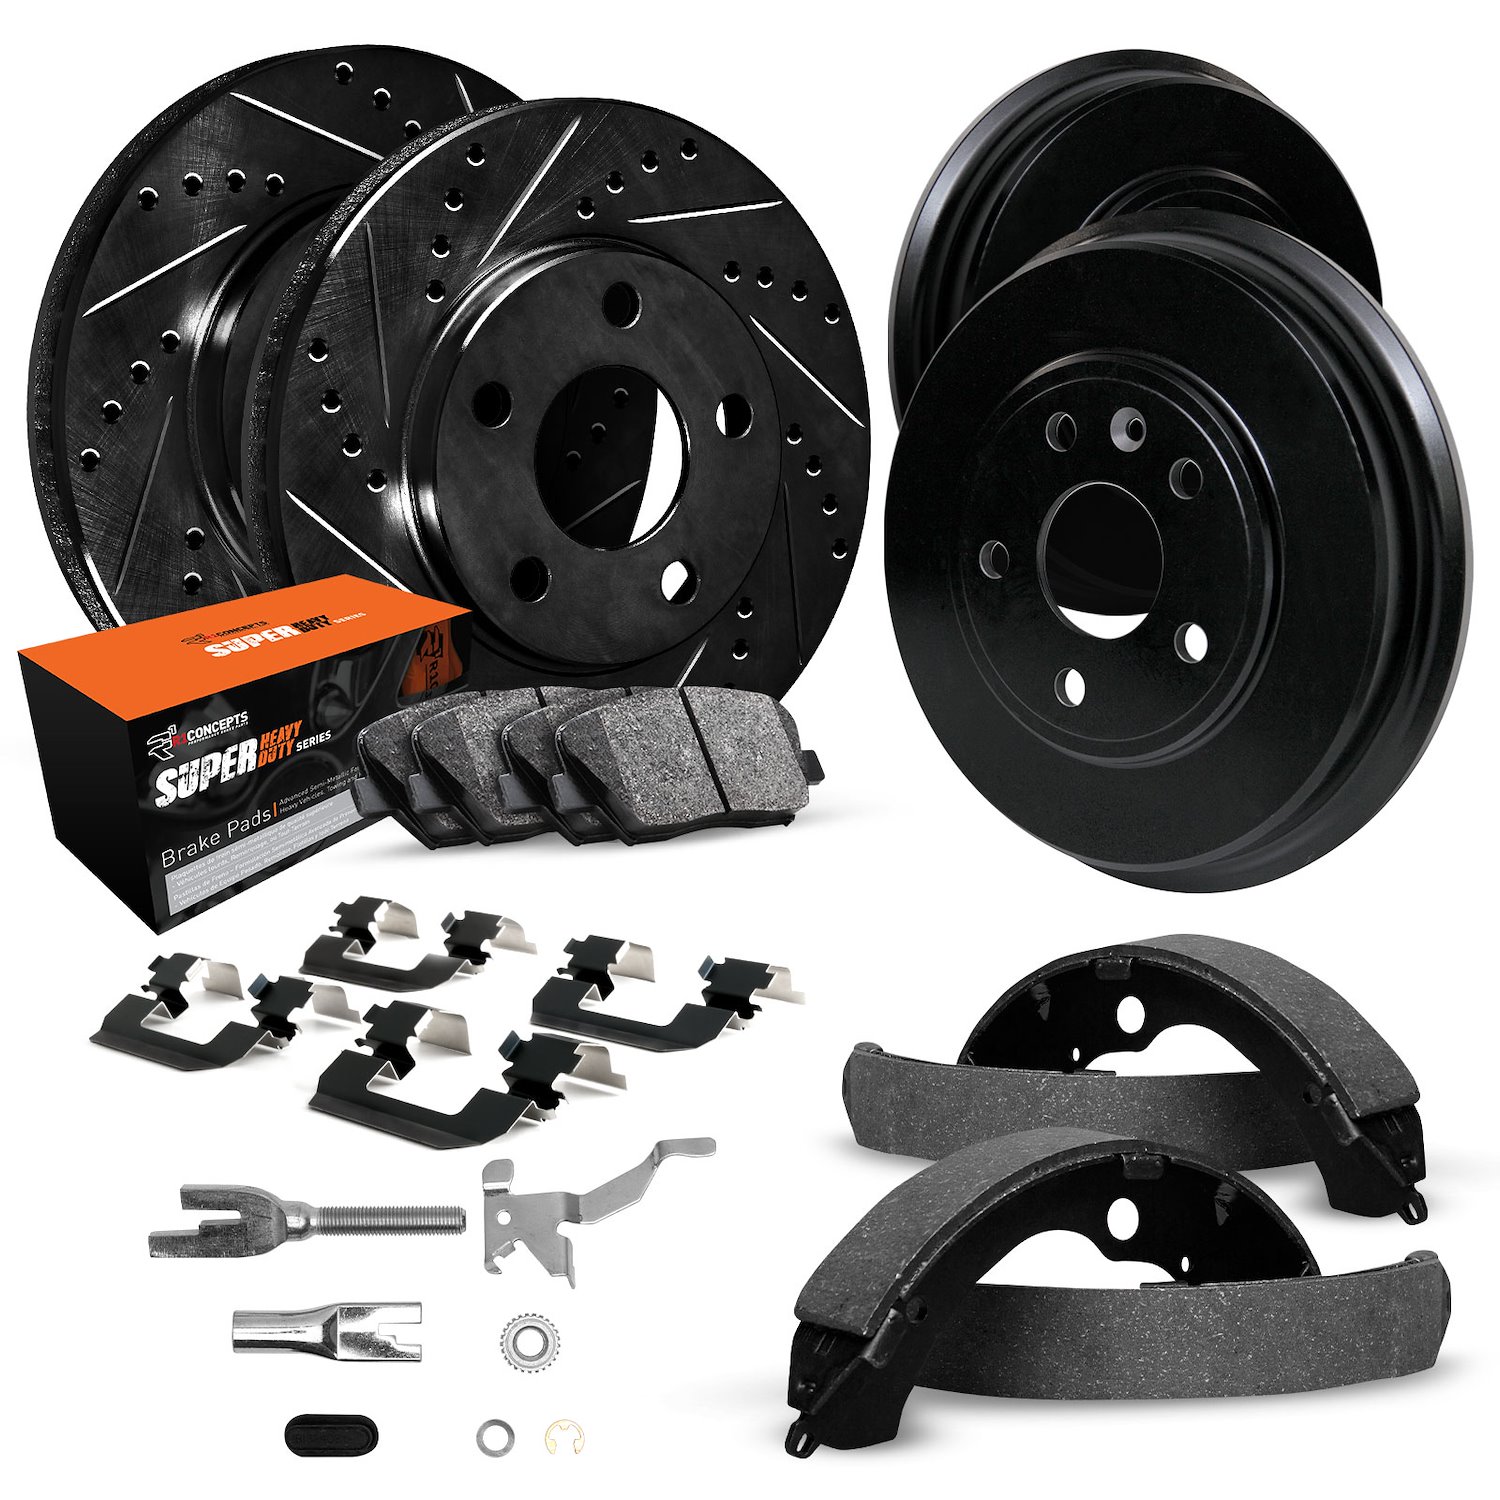 E-Line Slotted Black Brake Rotor & Drum Set w/Super-Duty Pads, Shoes, Hardware/Adjusters, 1974-1974 Ford/Lincoln/Mercury/Mazda